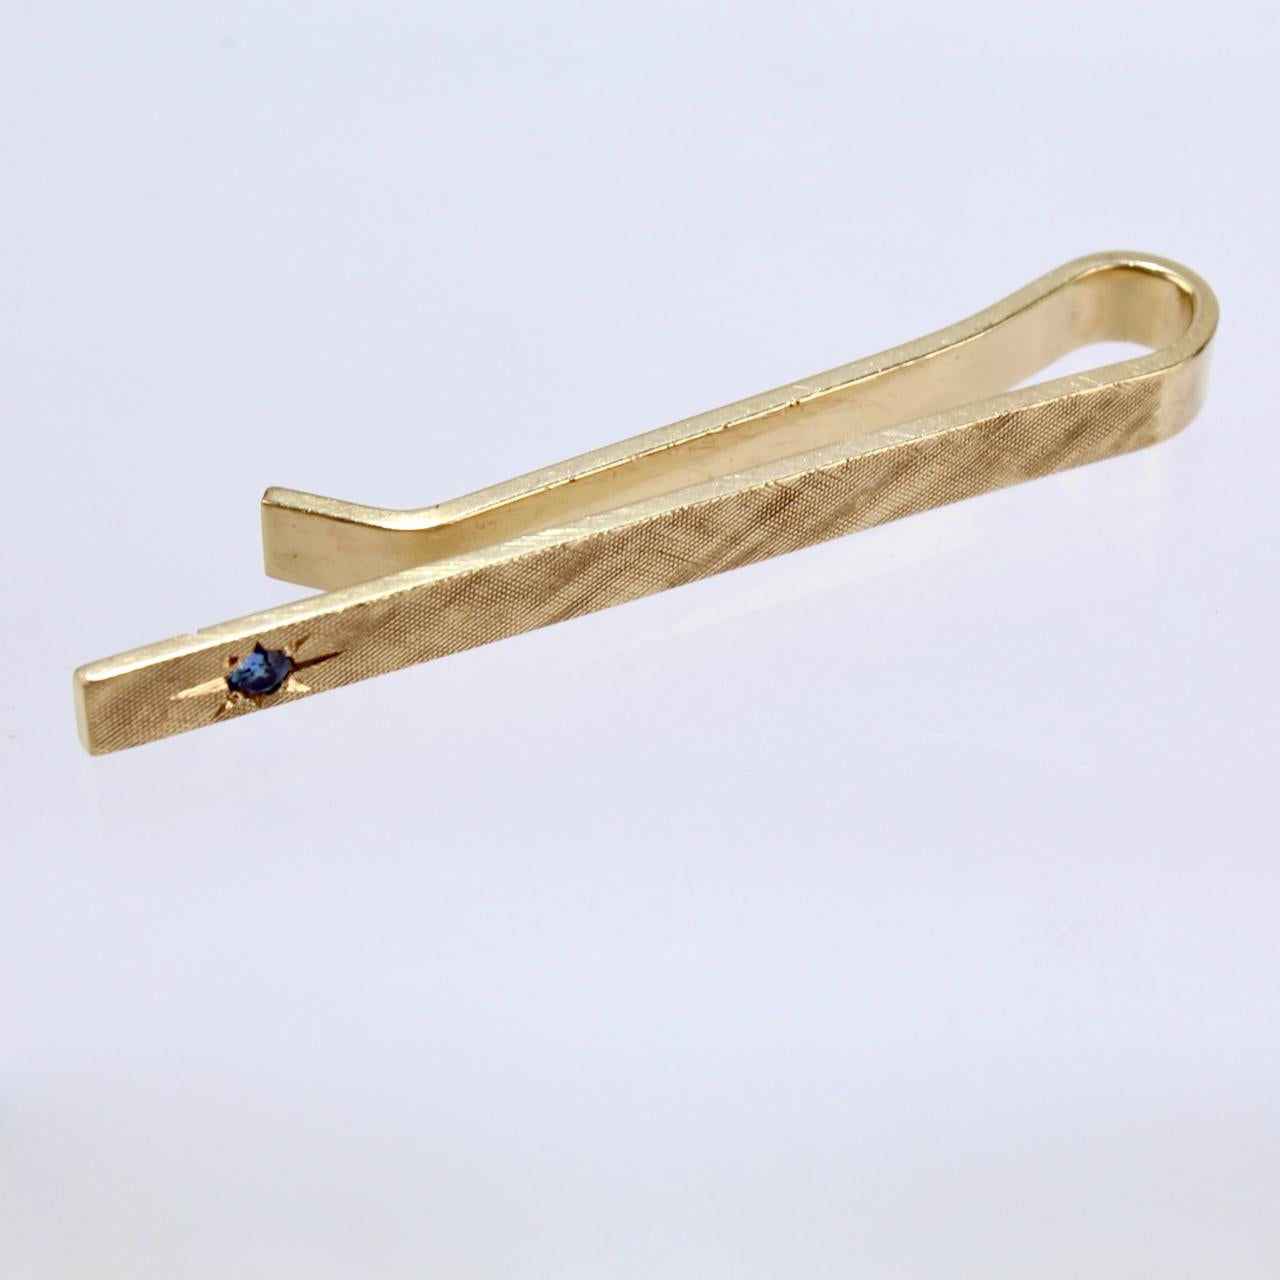 A handsome Tiffany & Co. tie clip in 14K gold in a refined size.

The thin tie bar features a wheel engraved cross hatch pattern and is set with a small round cut sapphire.  

Eye catching Mid-Century design from Tiffany!

Date:
Mid-20th